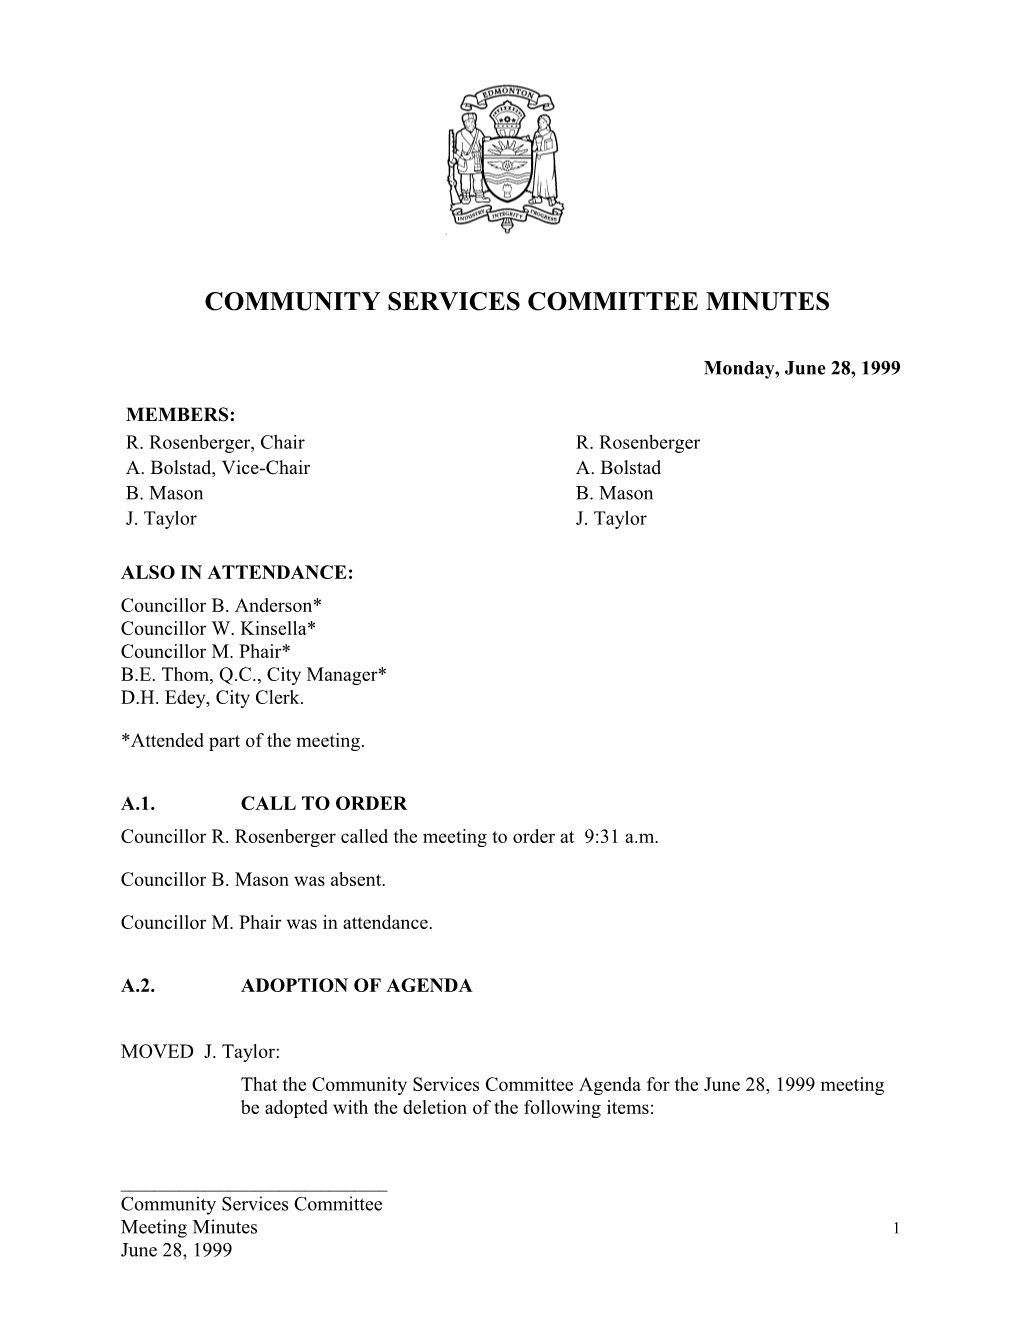 Minutes for Community Services Committee June 28, 1999 Meeting